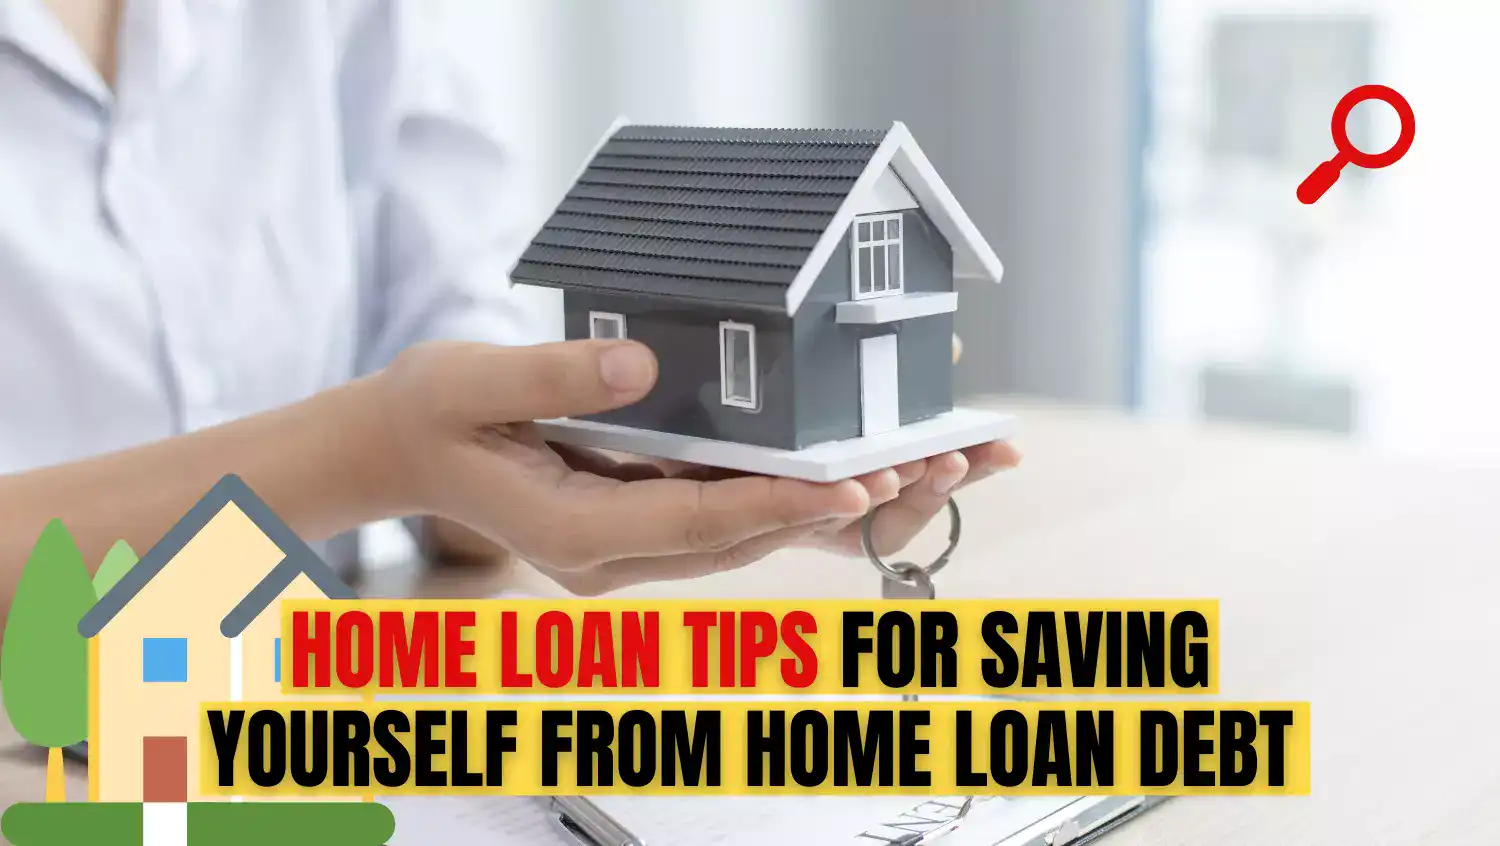 Home Loan Tips for saving yourself from home loan debt